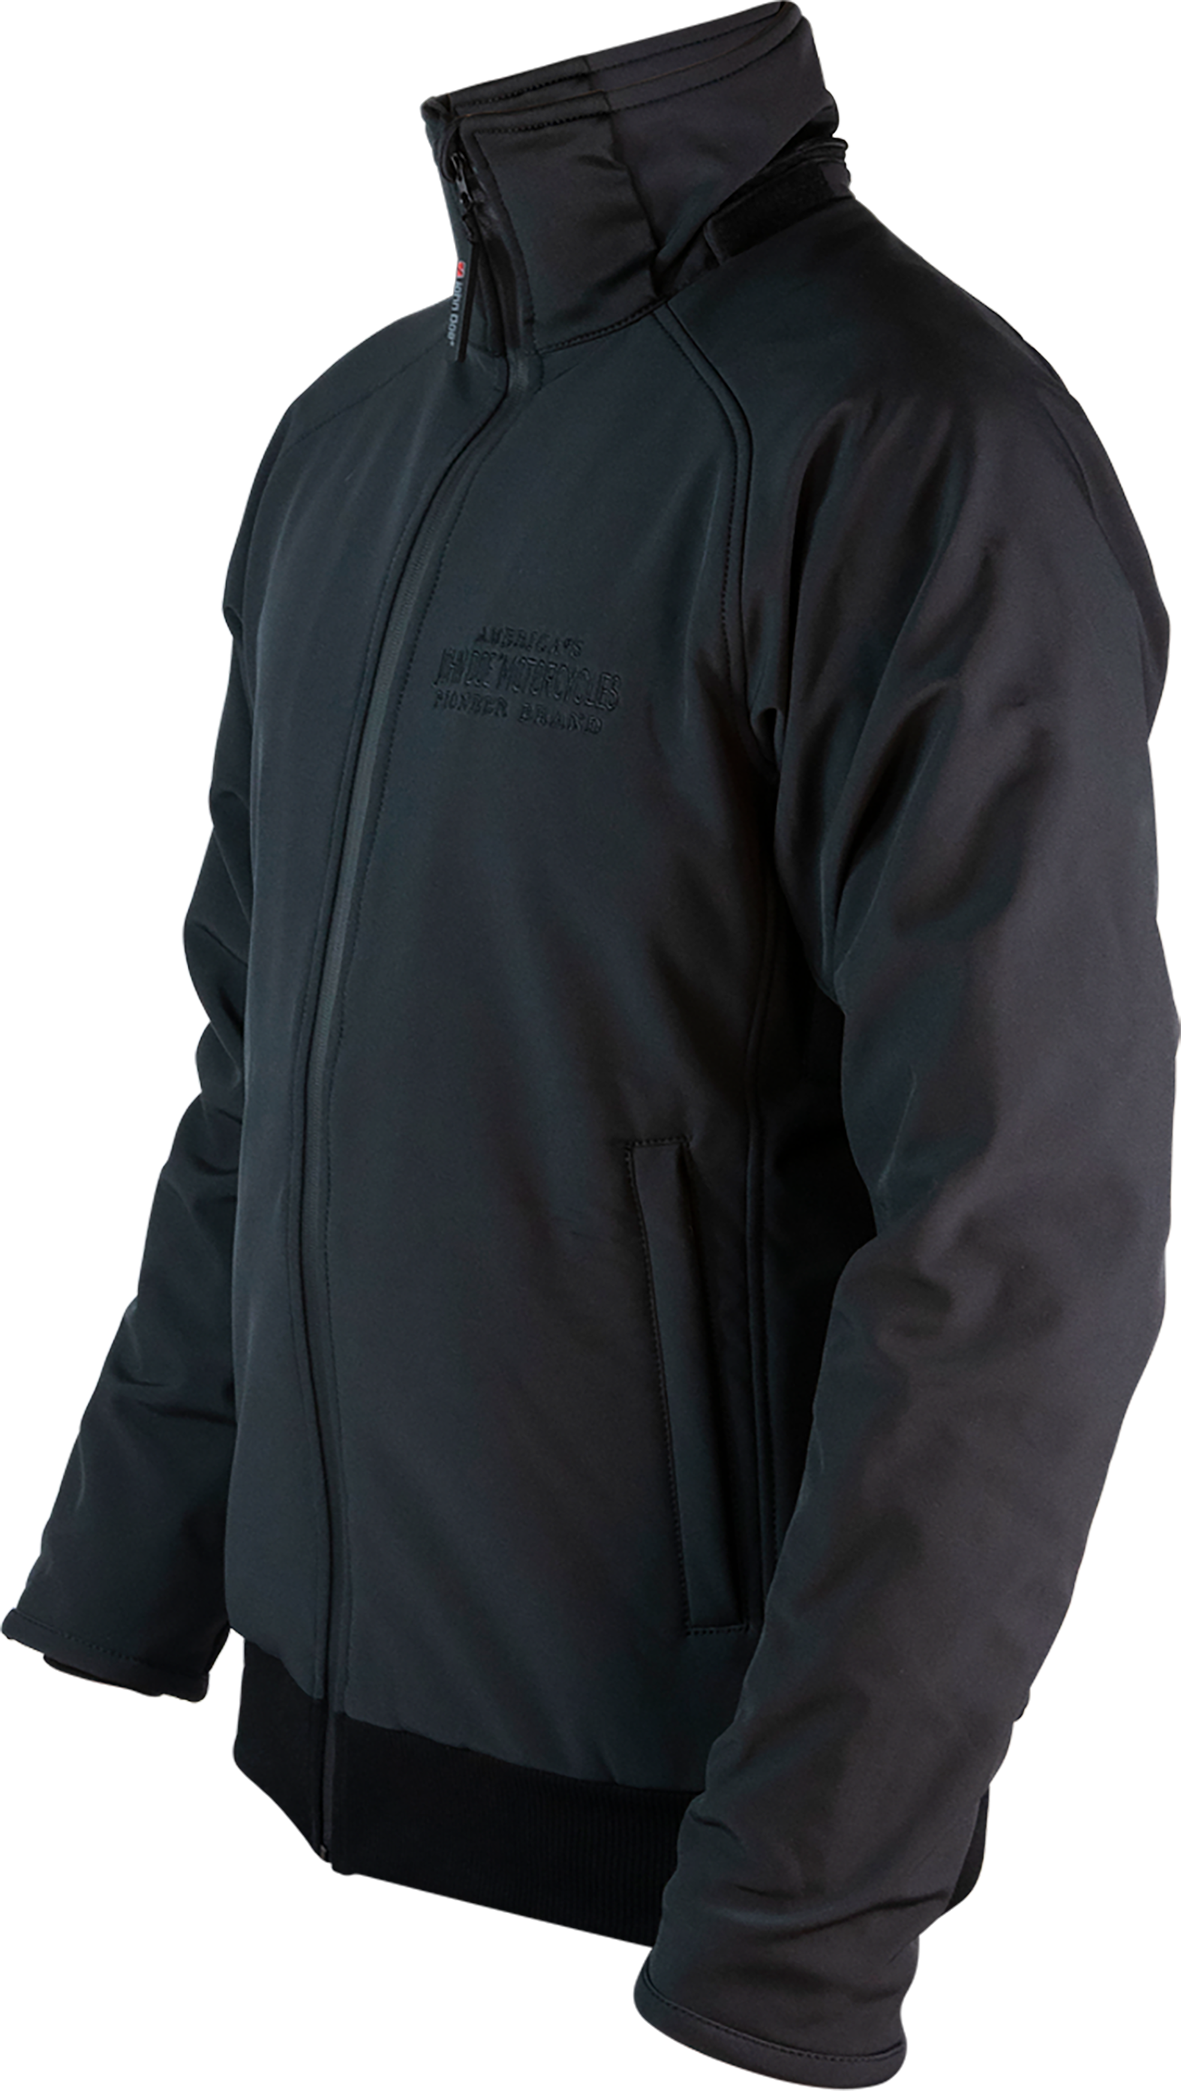 Mens Softshell Jacket 2 in 1 with XTM - Made for Riding